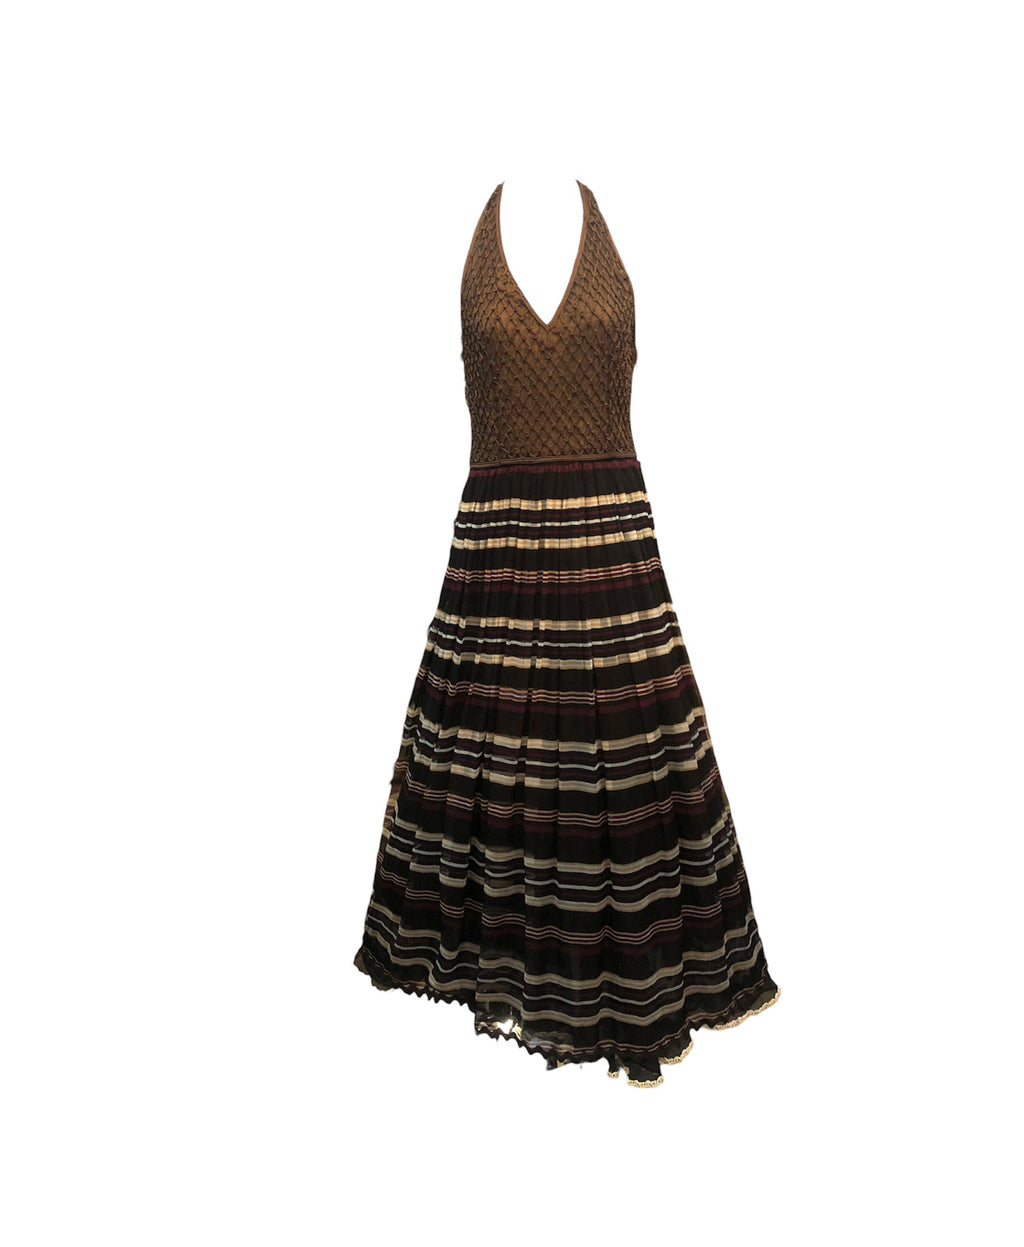 Christian Dior 70s Chocolate Brown Halter Neck Gown with Petticoats